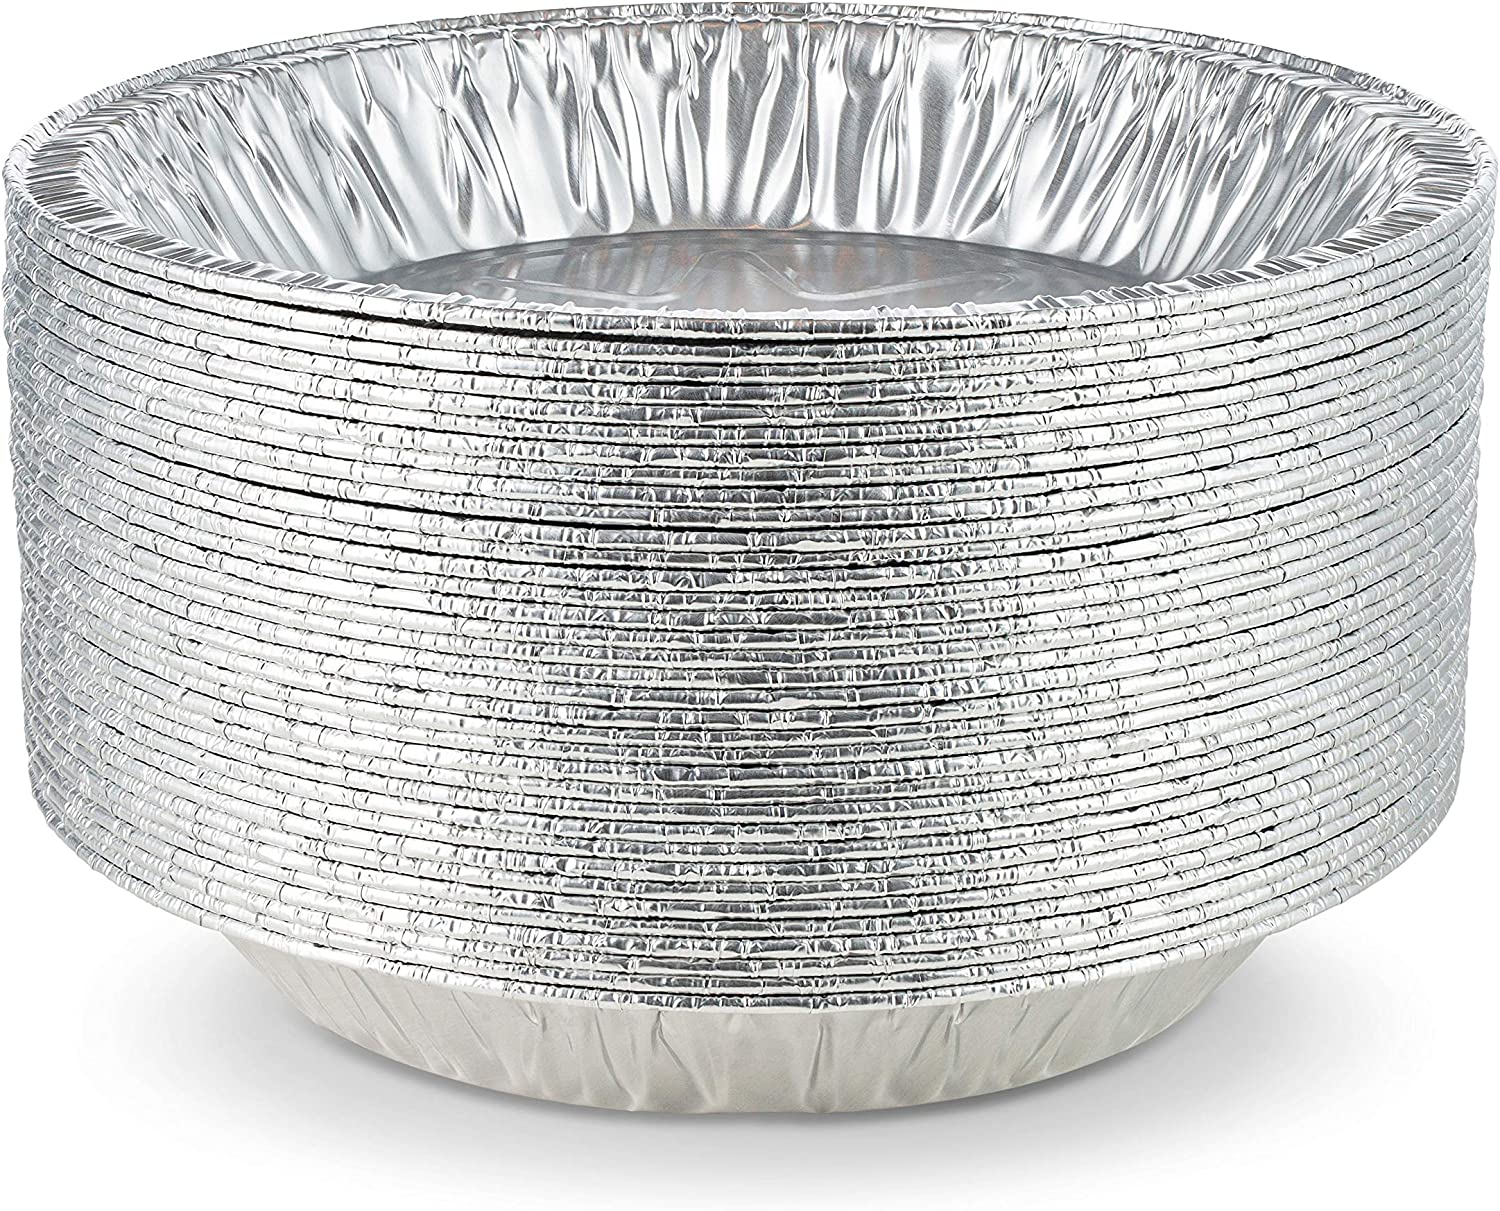 MontoPack 9” Aluminum Foil Pie Pans | Round Disposable Containers with  Angled Walls for Tart Baking, Storing, Serving & Reheating | Freezer and  Oven